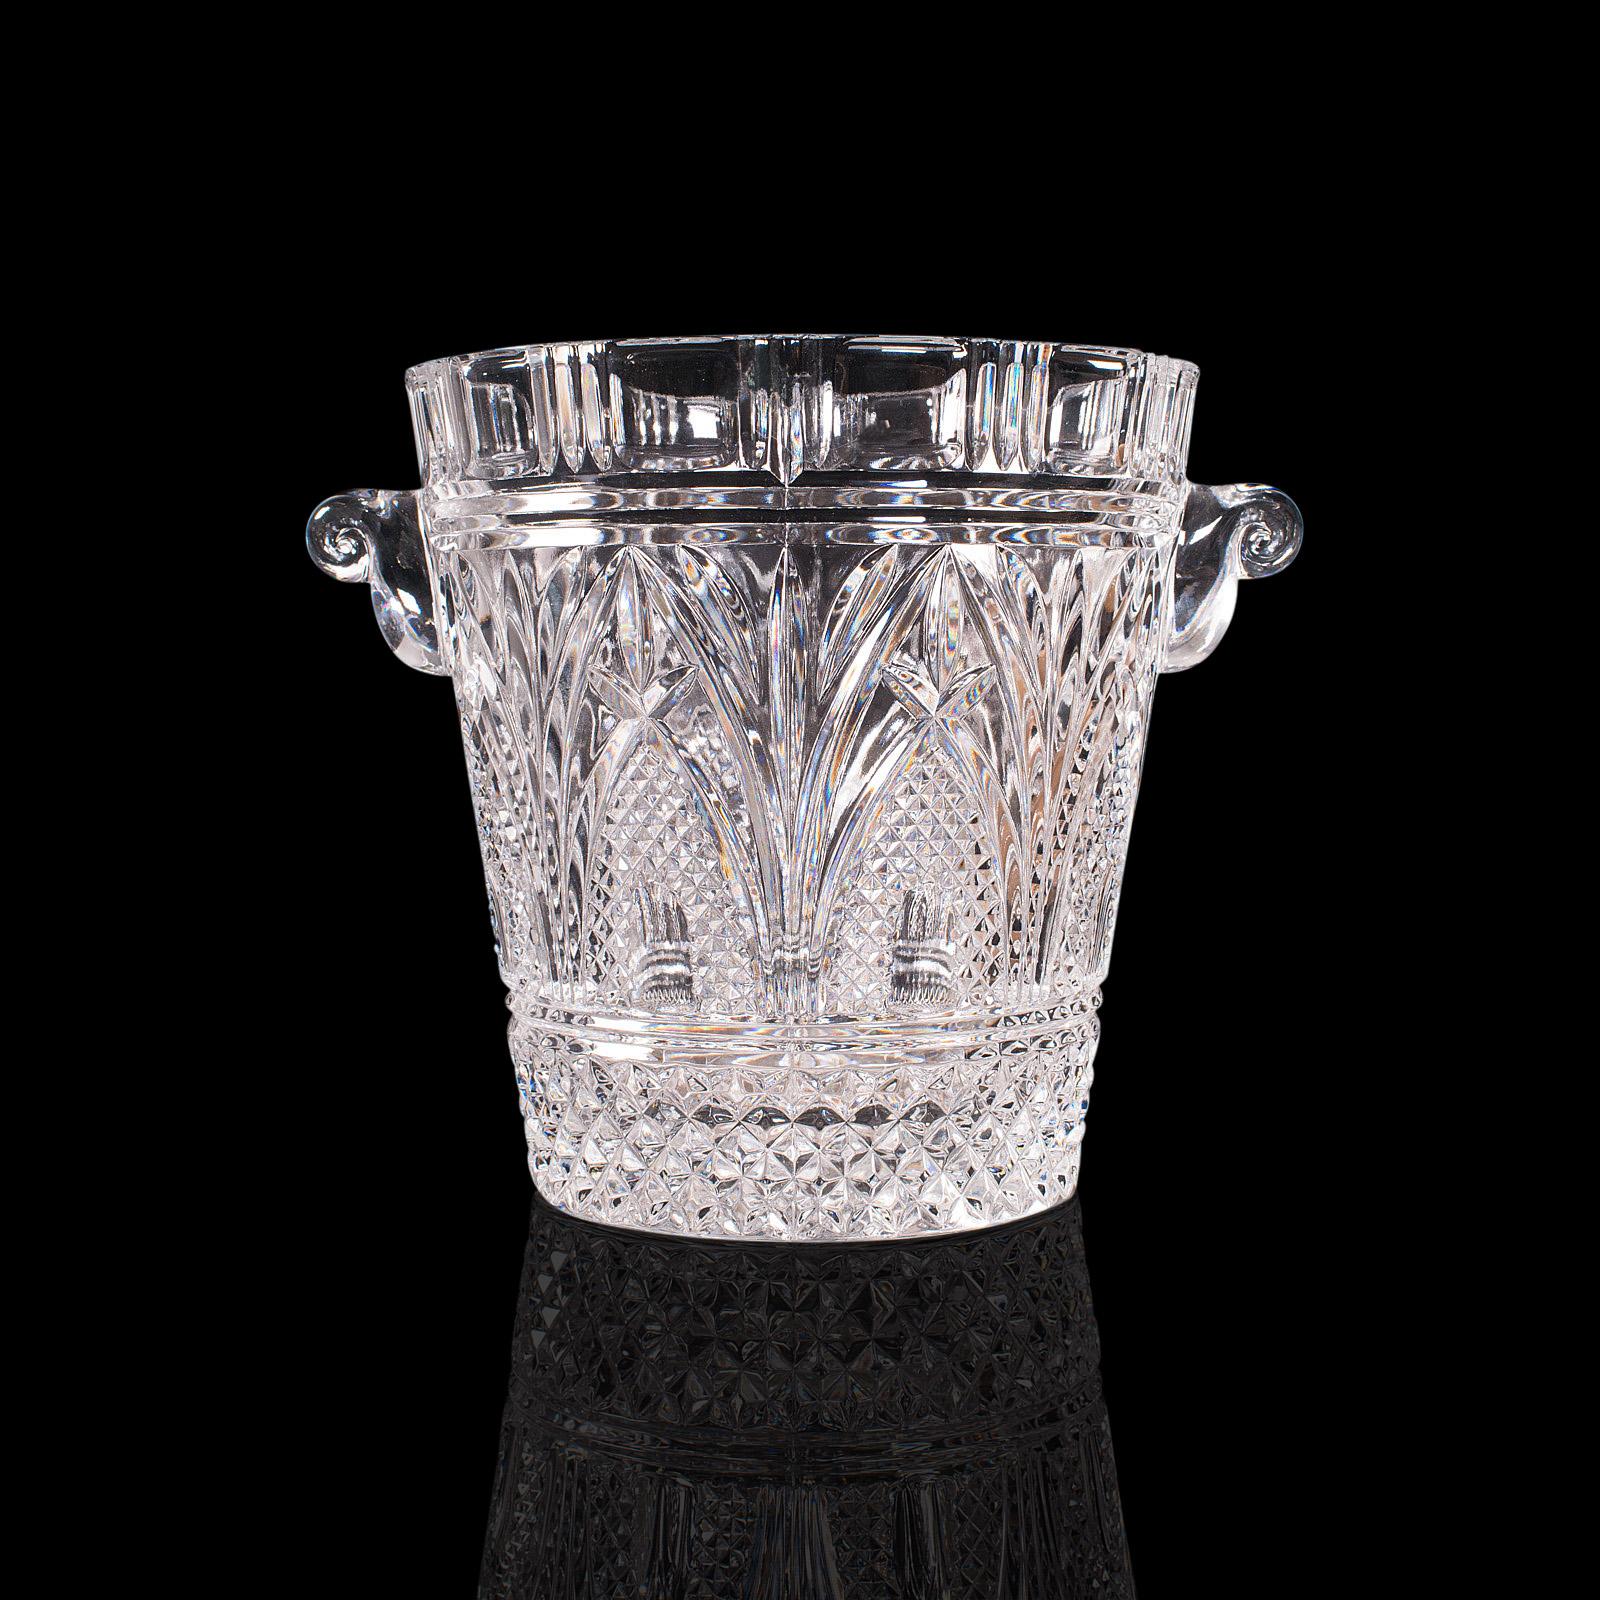 This is an antique champagne cooler. An English, cut glass wine bottle or drinks ice bucket, dating to the Edwardian period, circa 1910.

Superb cut glass cooler of generous proportion
Displays a desirable aged patina and free of